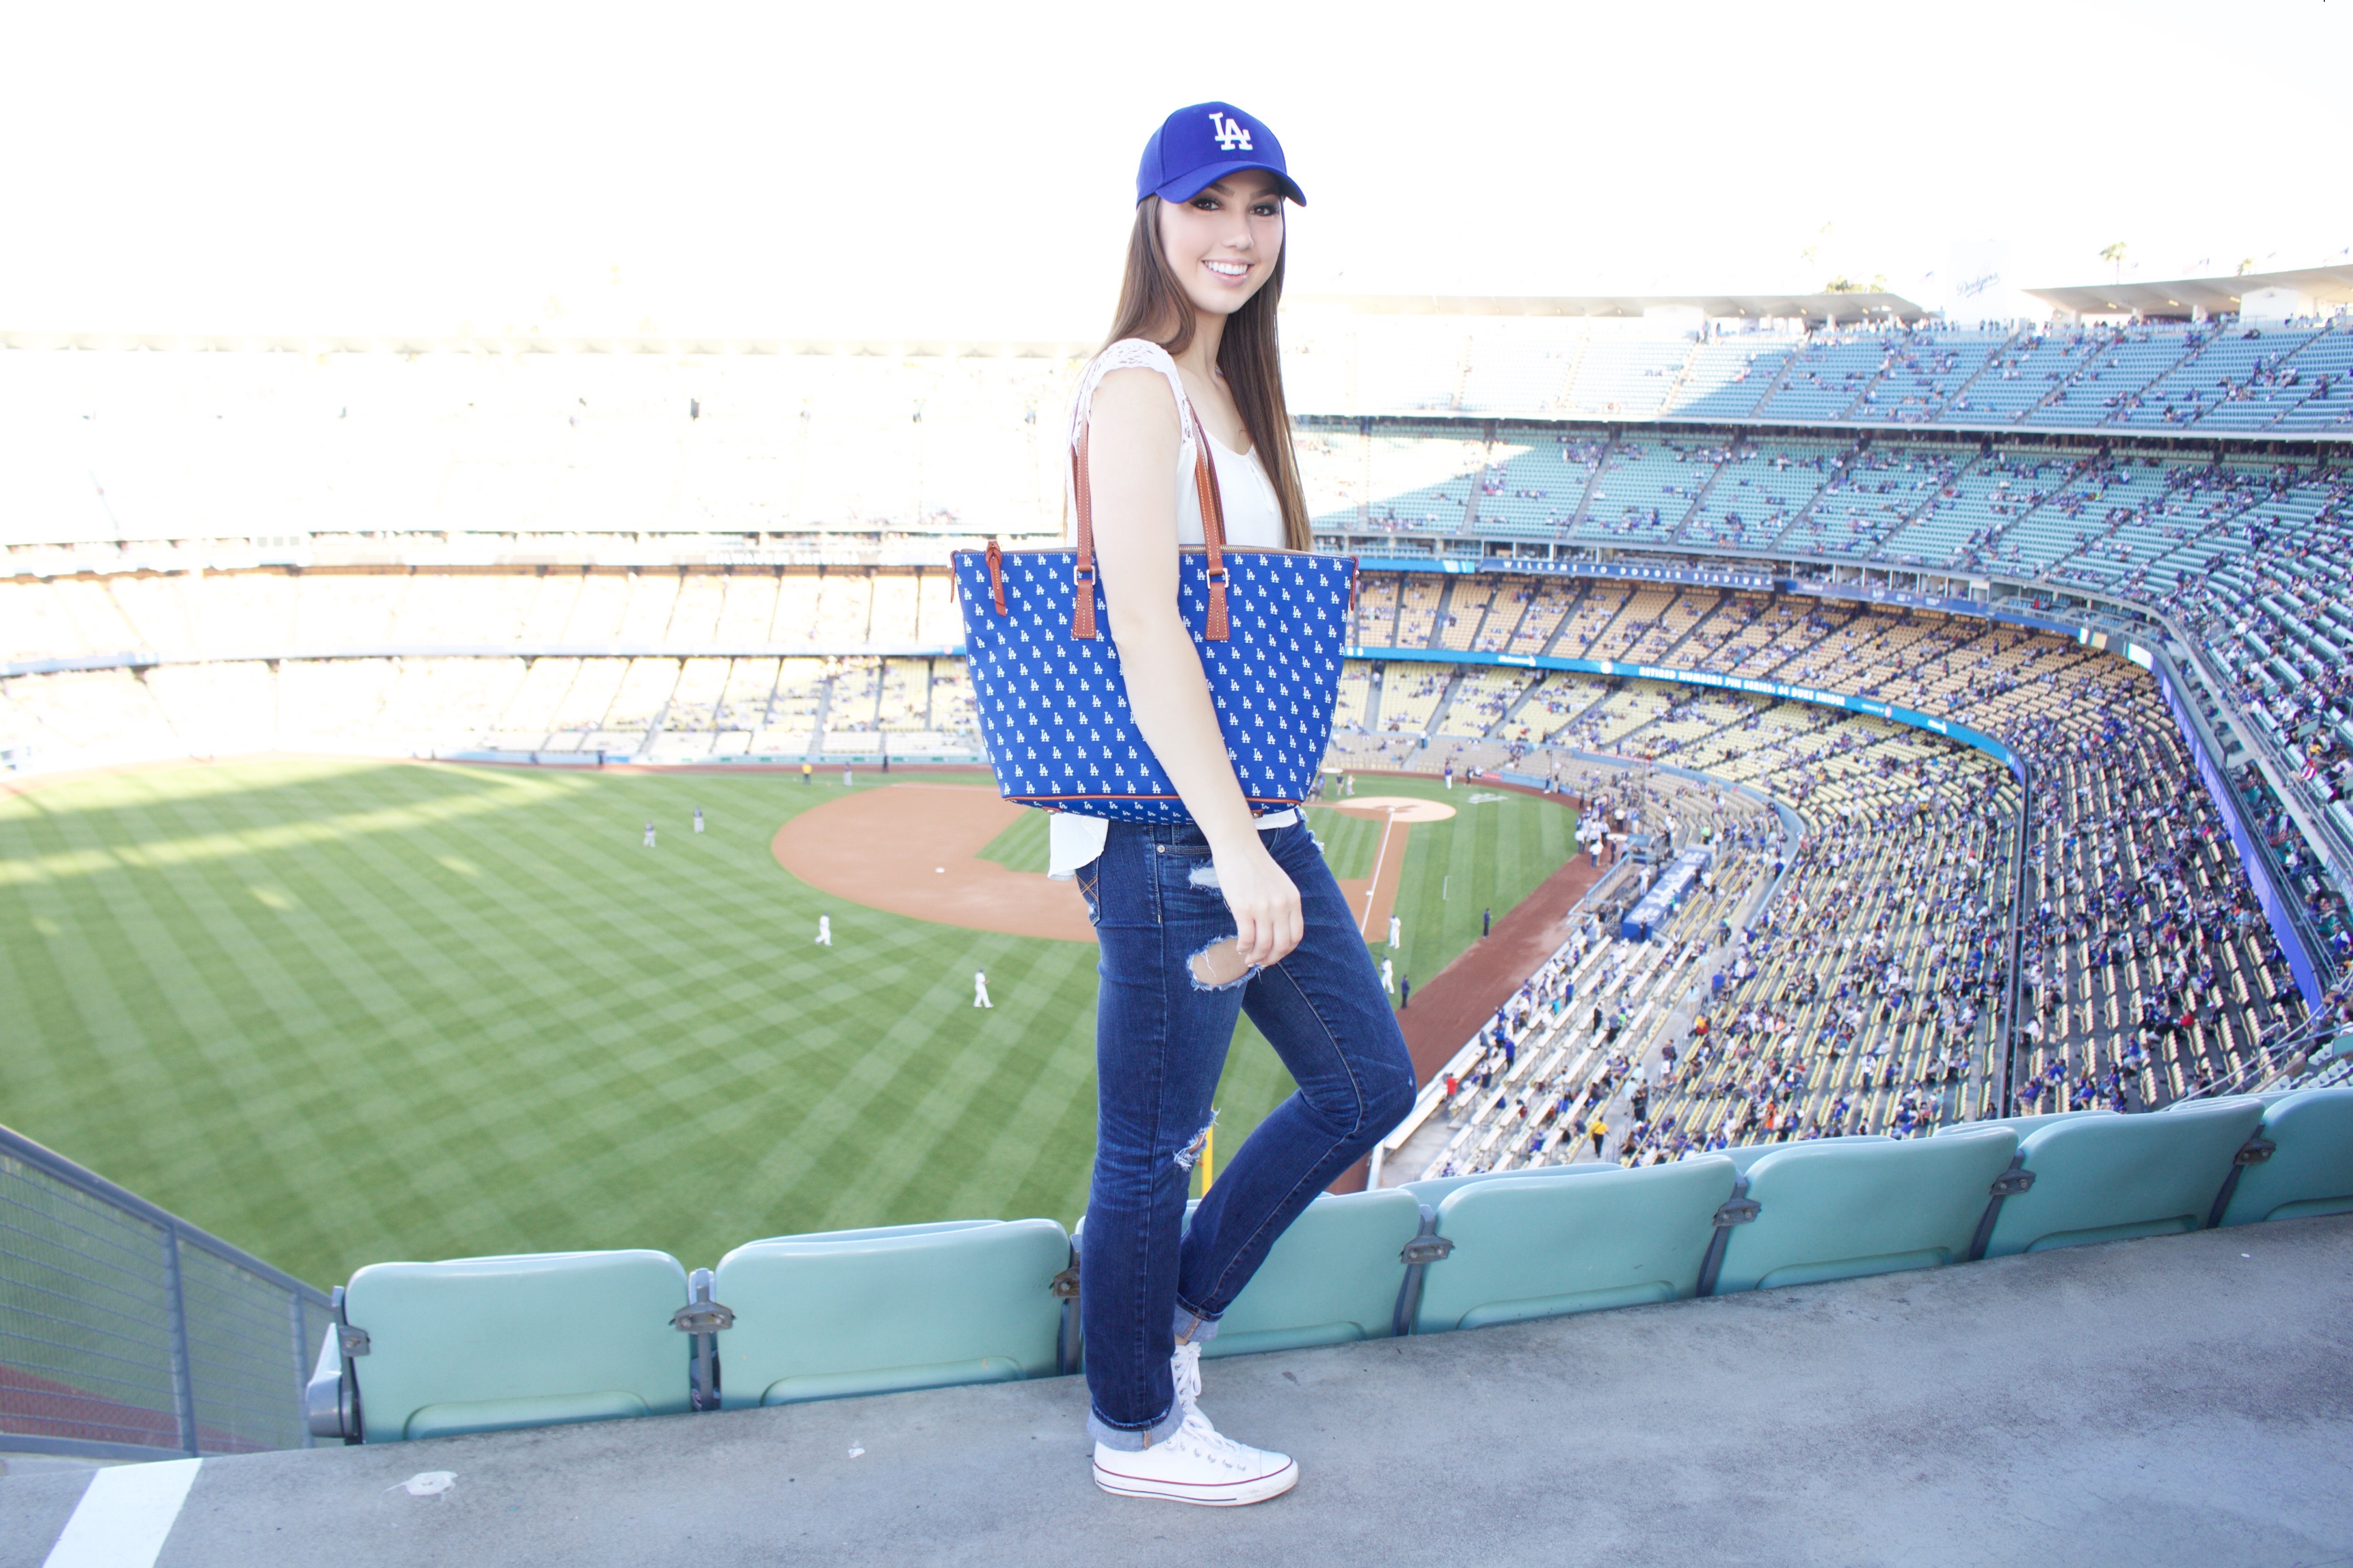 Pin by What I like xox on Dodgers.Lady's  Dodgers outfit, Sports attire,  Baseball outfit